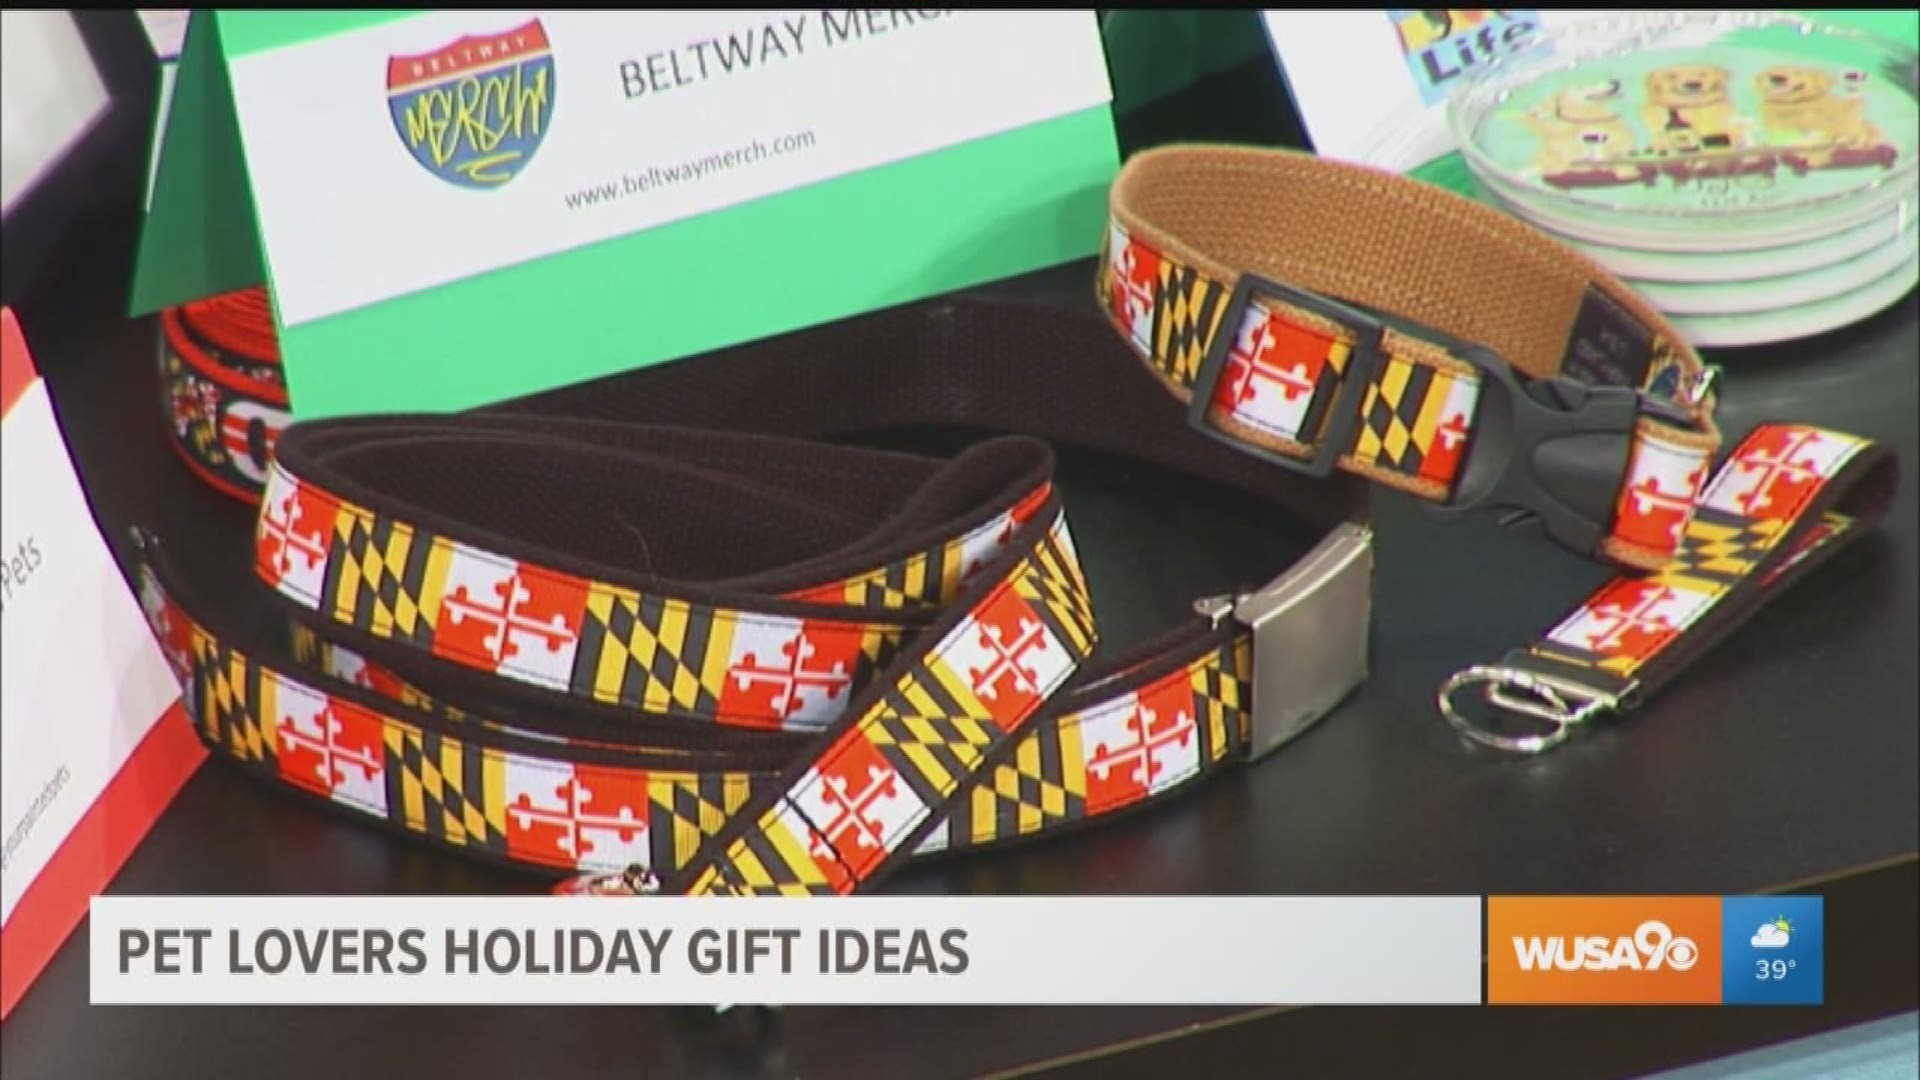 Joyce Smythe, president of Goin' In Style has tips on how to find the best holiday gift for all pet lovers.